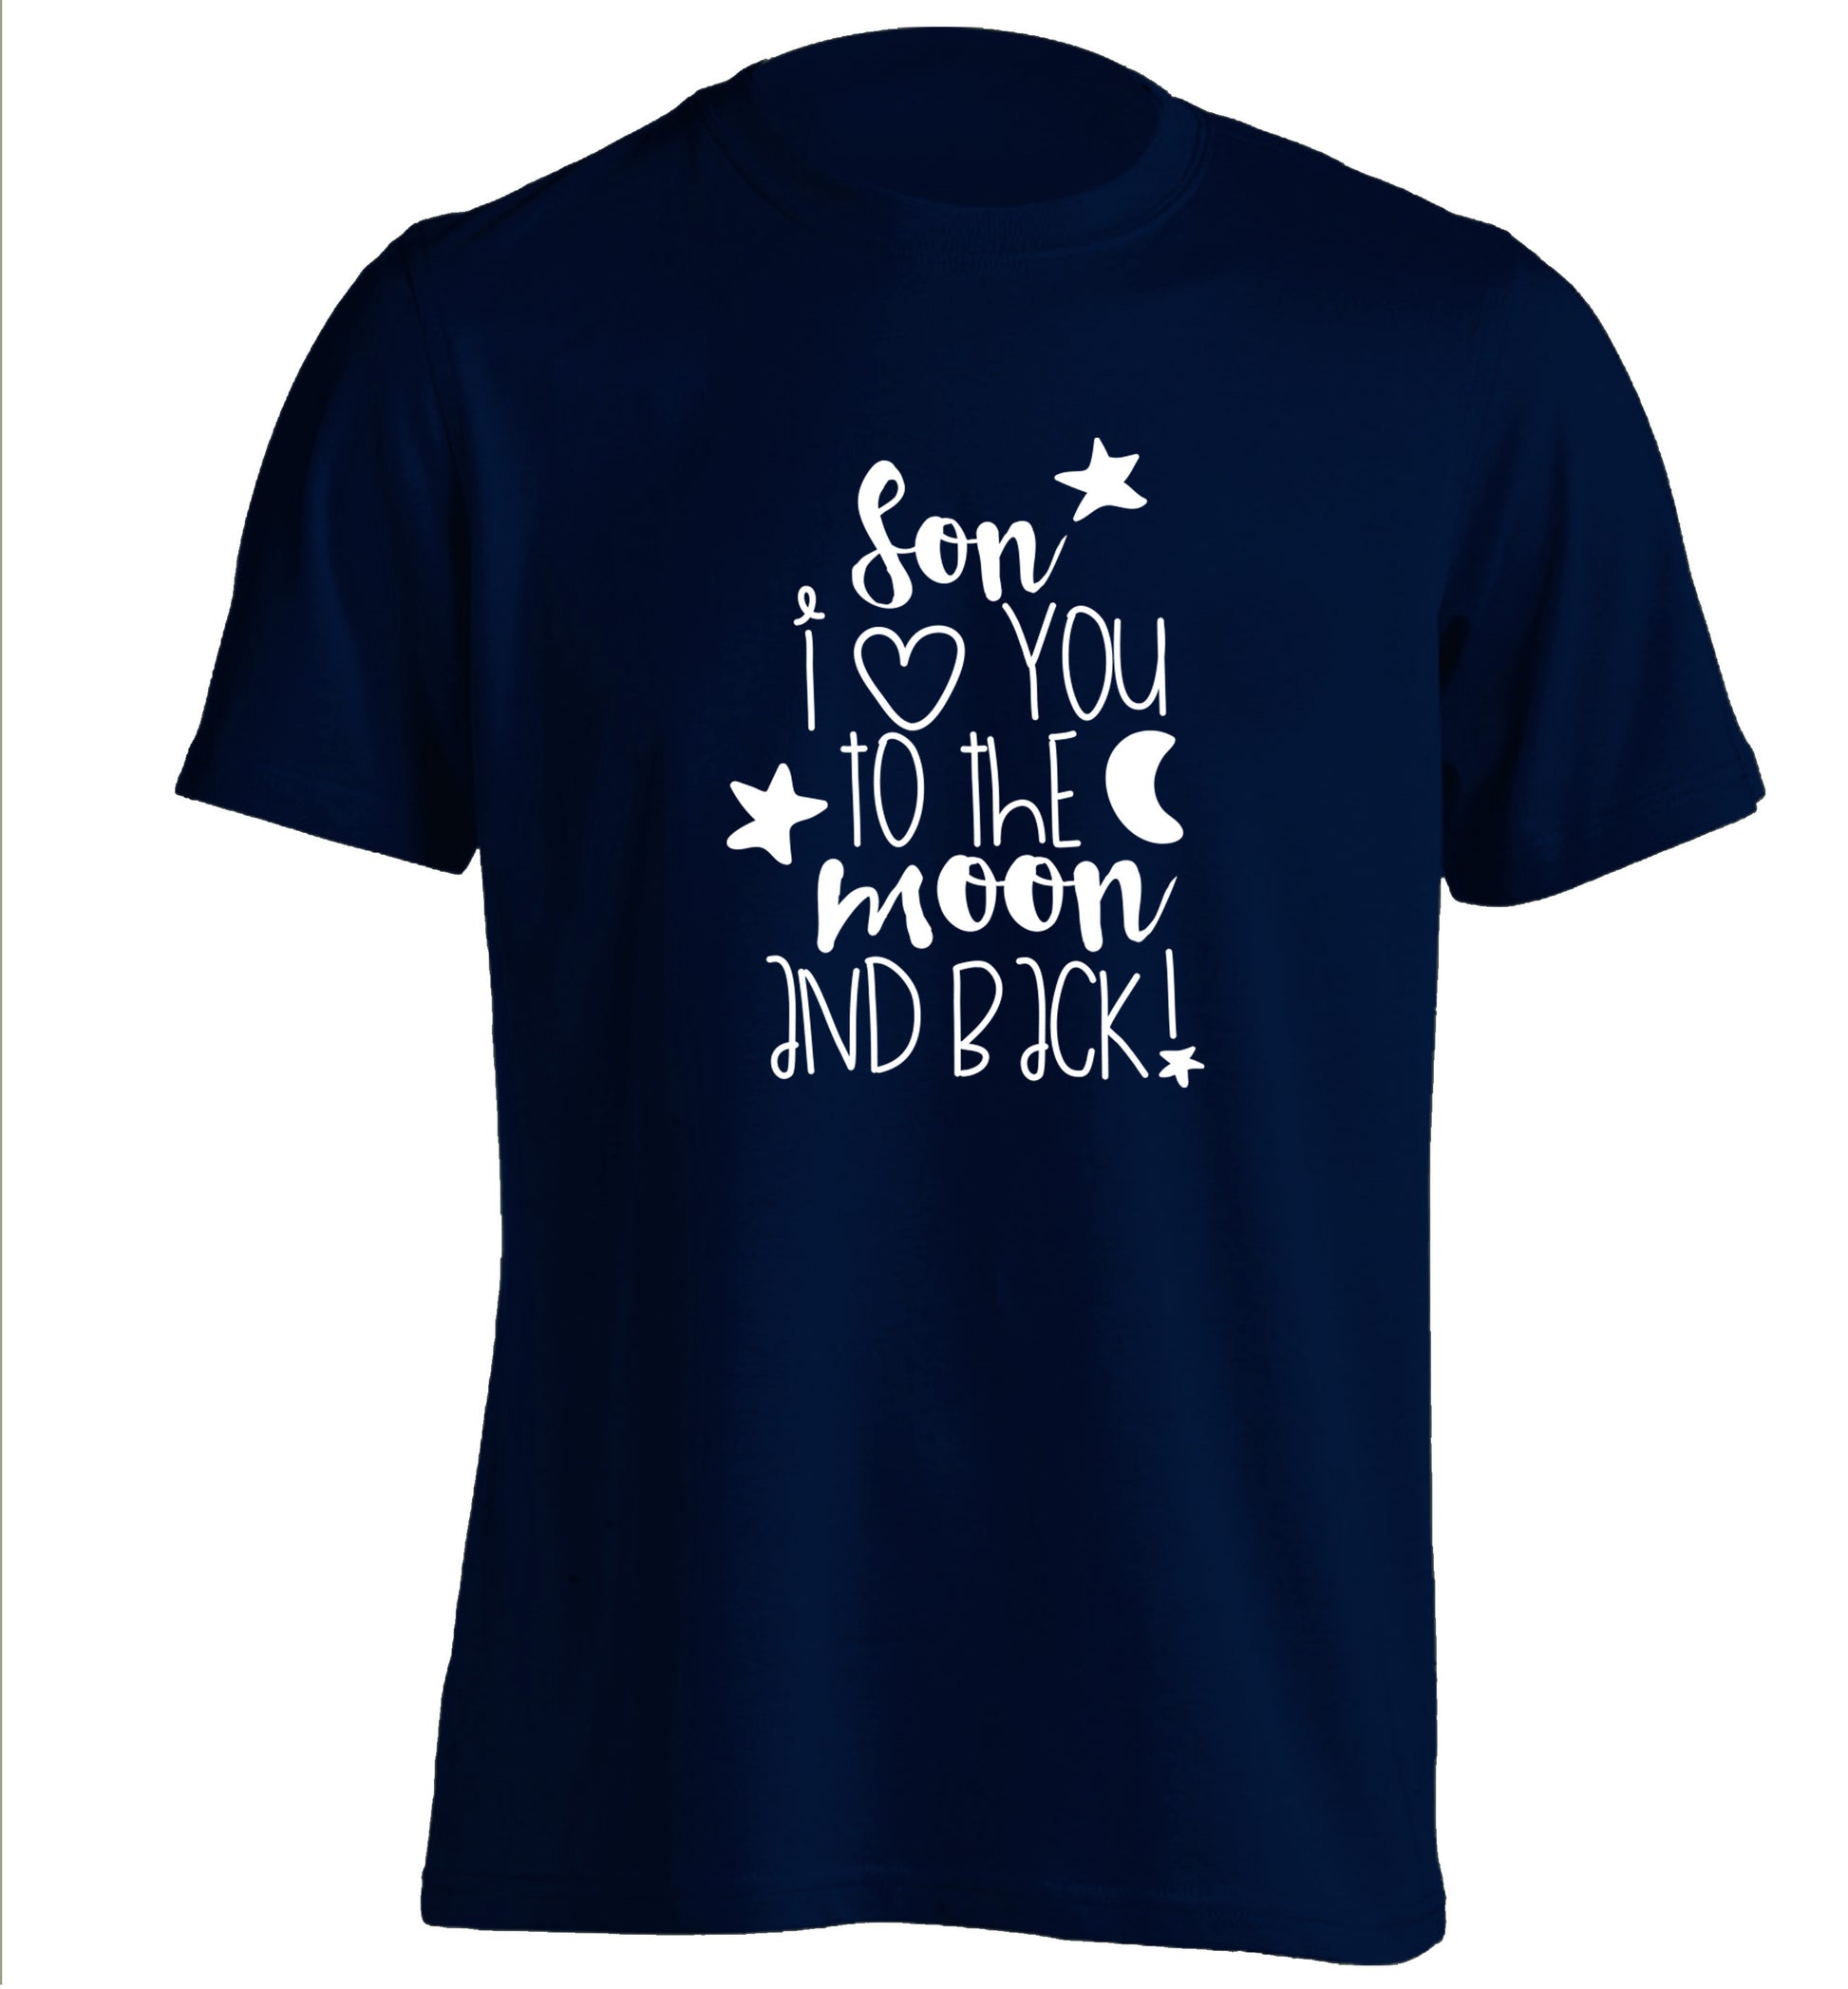 Son I love you to the moon and back adults unisex navy Tshirt 2XL